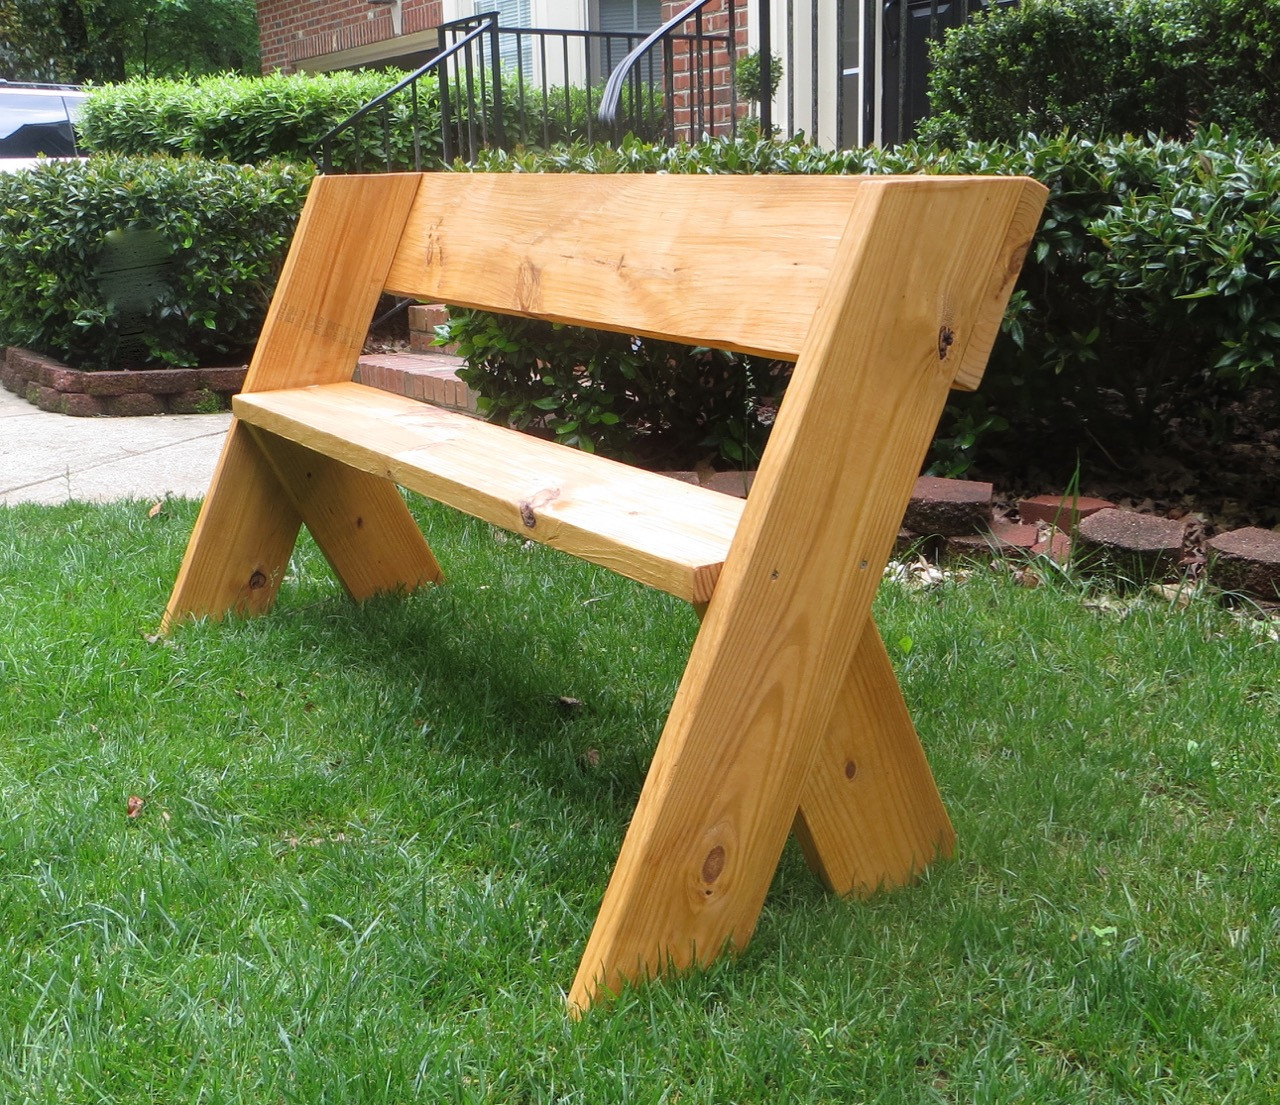 DIY Wood Bench
 The Project Lady DIY Tutorial $16 Simple Outdoor Wood Bench